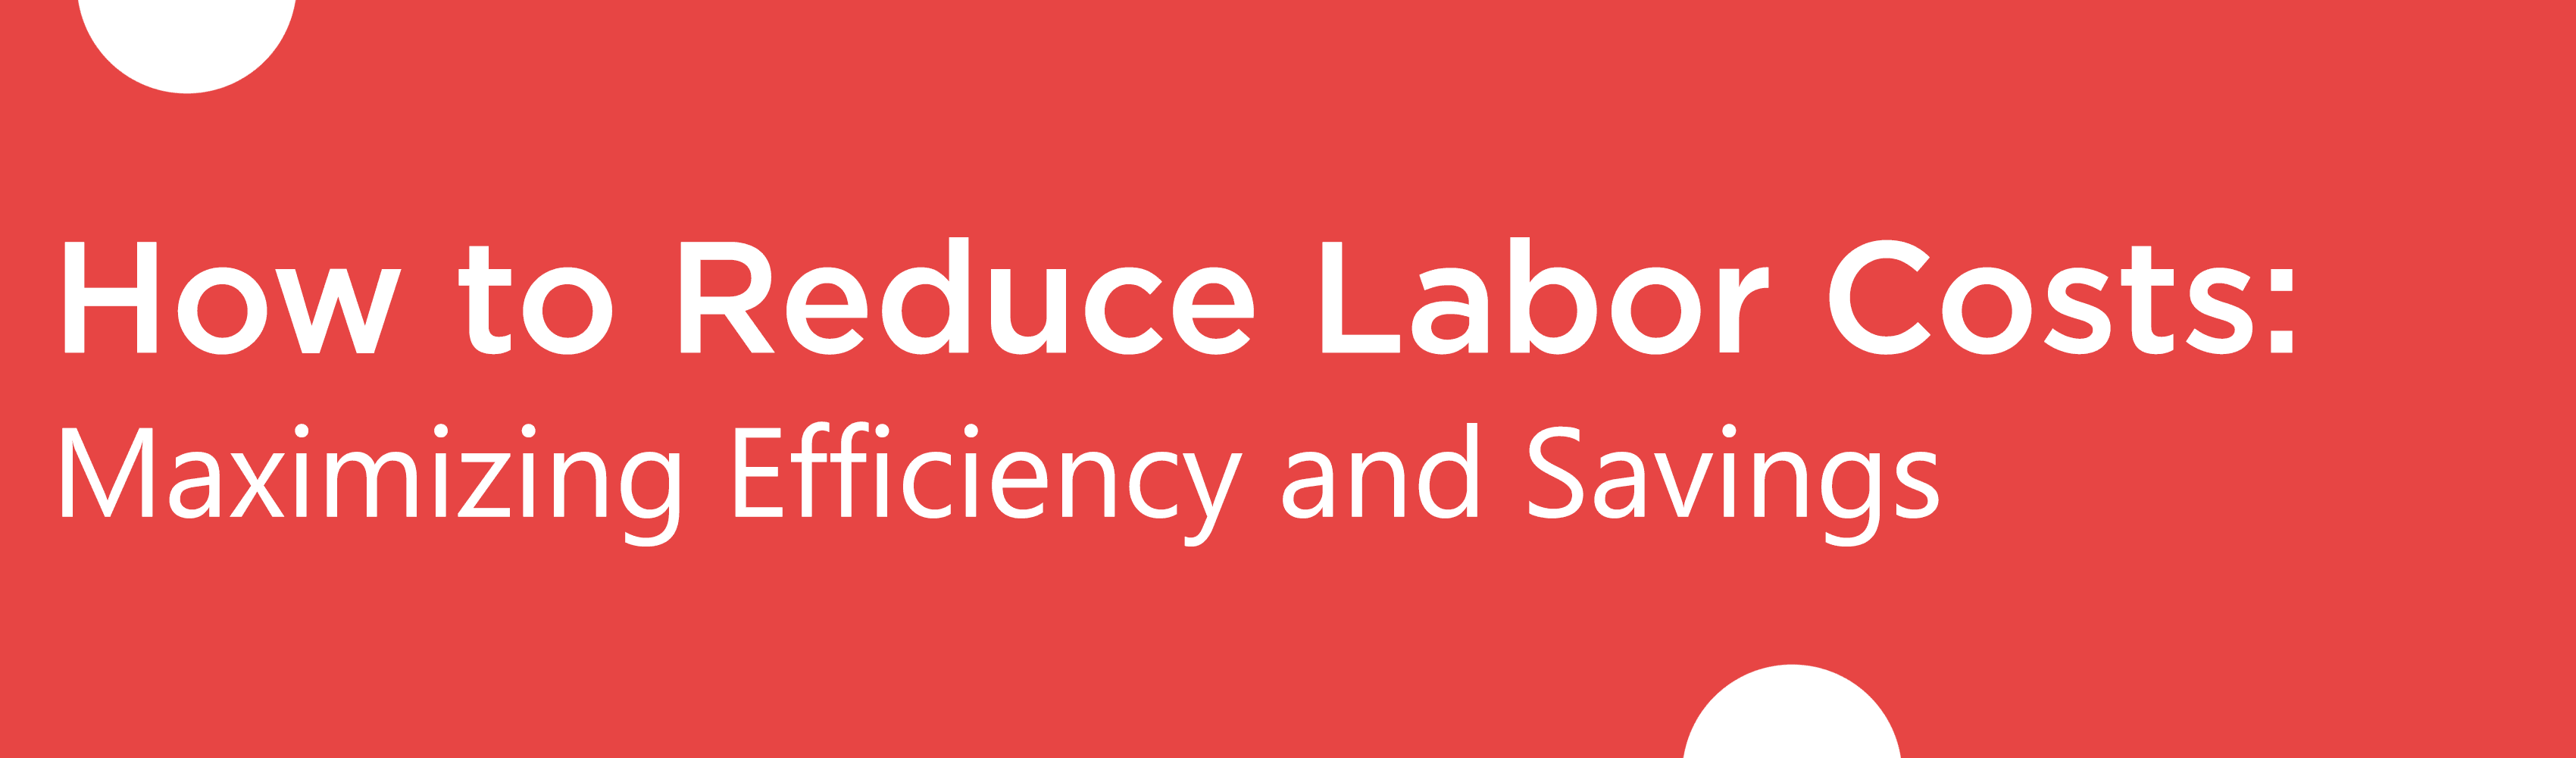 How to Reduce Labor Costs - Maximizing Efficiency and Savings